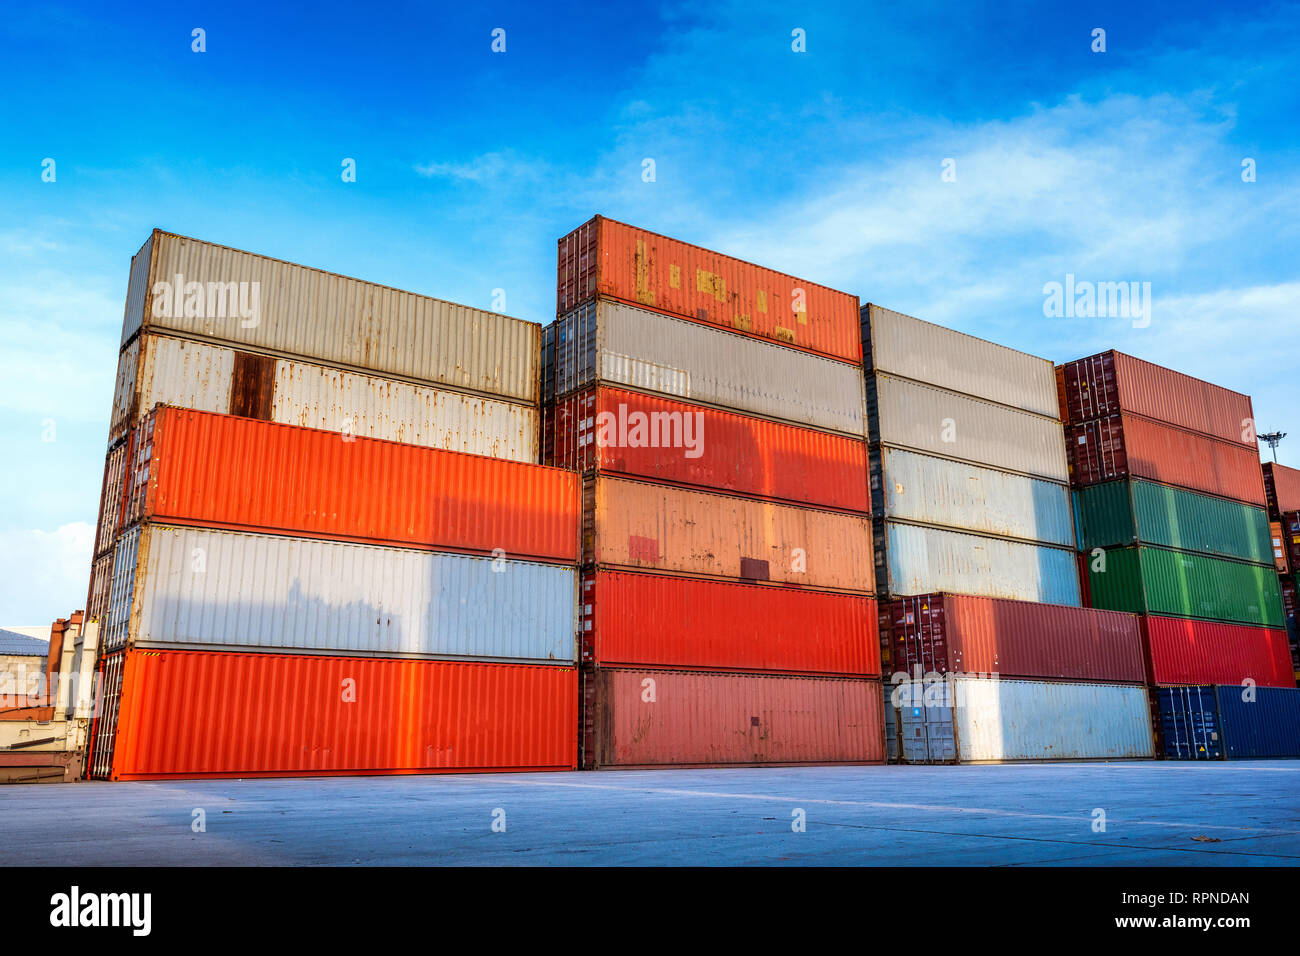 Industrial containers box for logistic import export business. Stock Photo